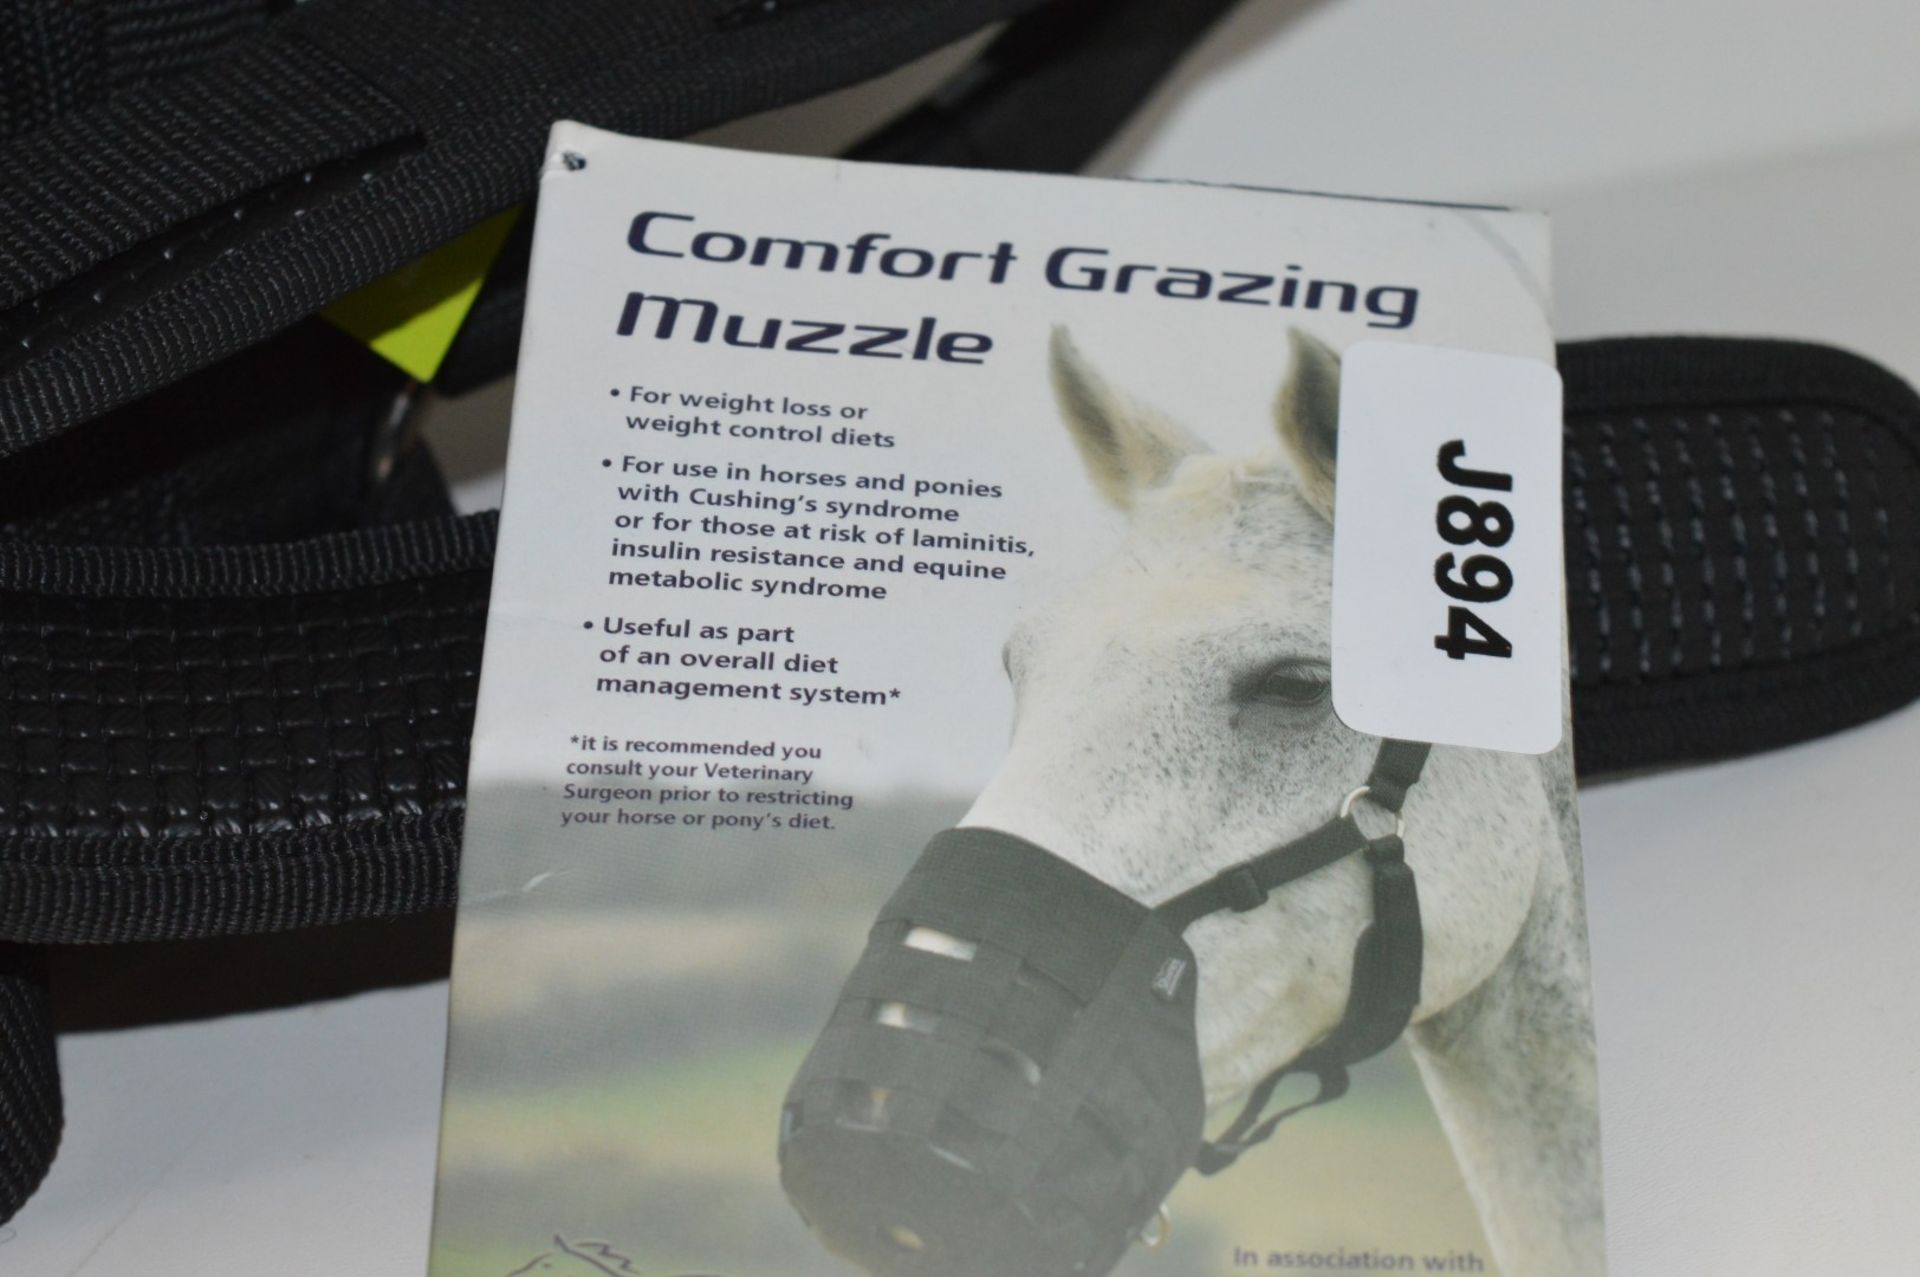 1 x Shires Comfort Grazing Muzzle - Full Size 495N Black - New Stock - CL401 - Ref J894 - - Image 2 of 4